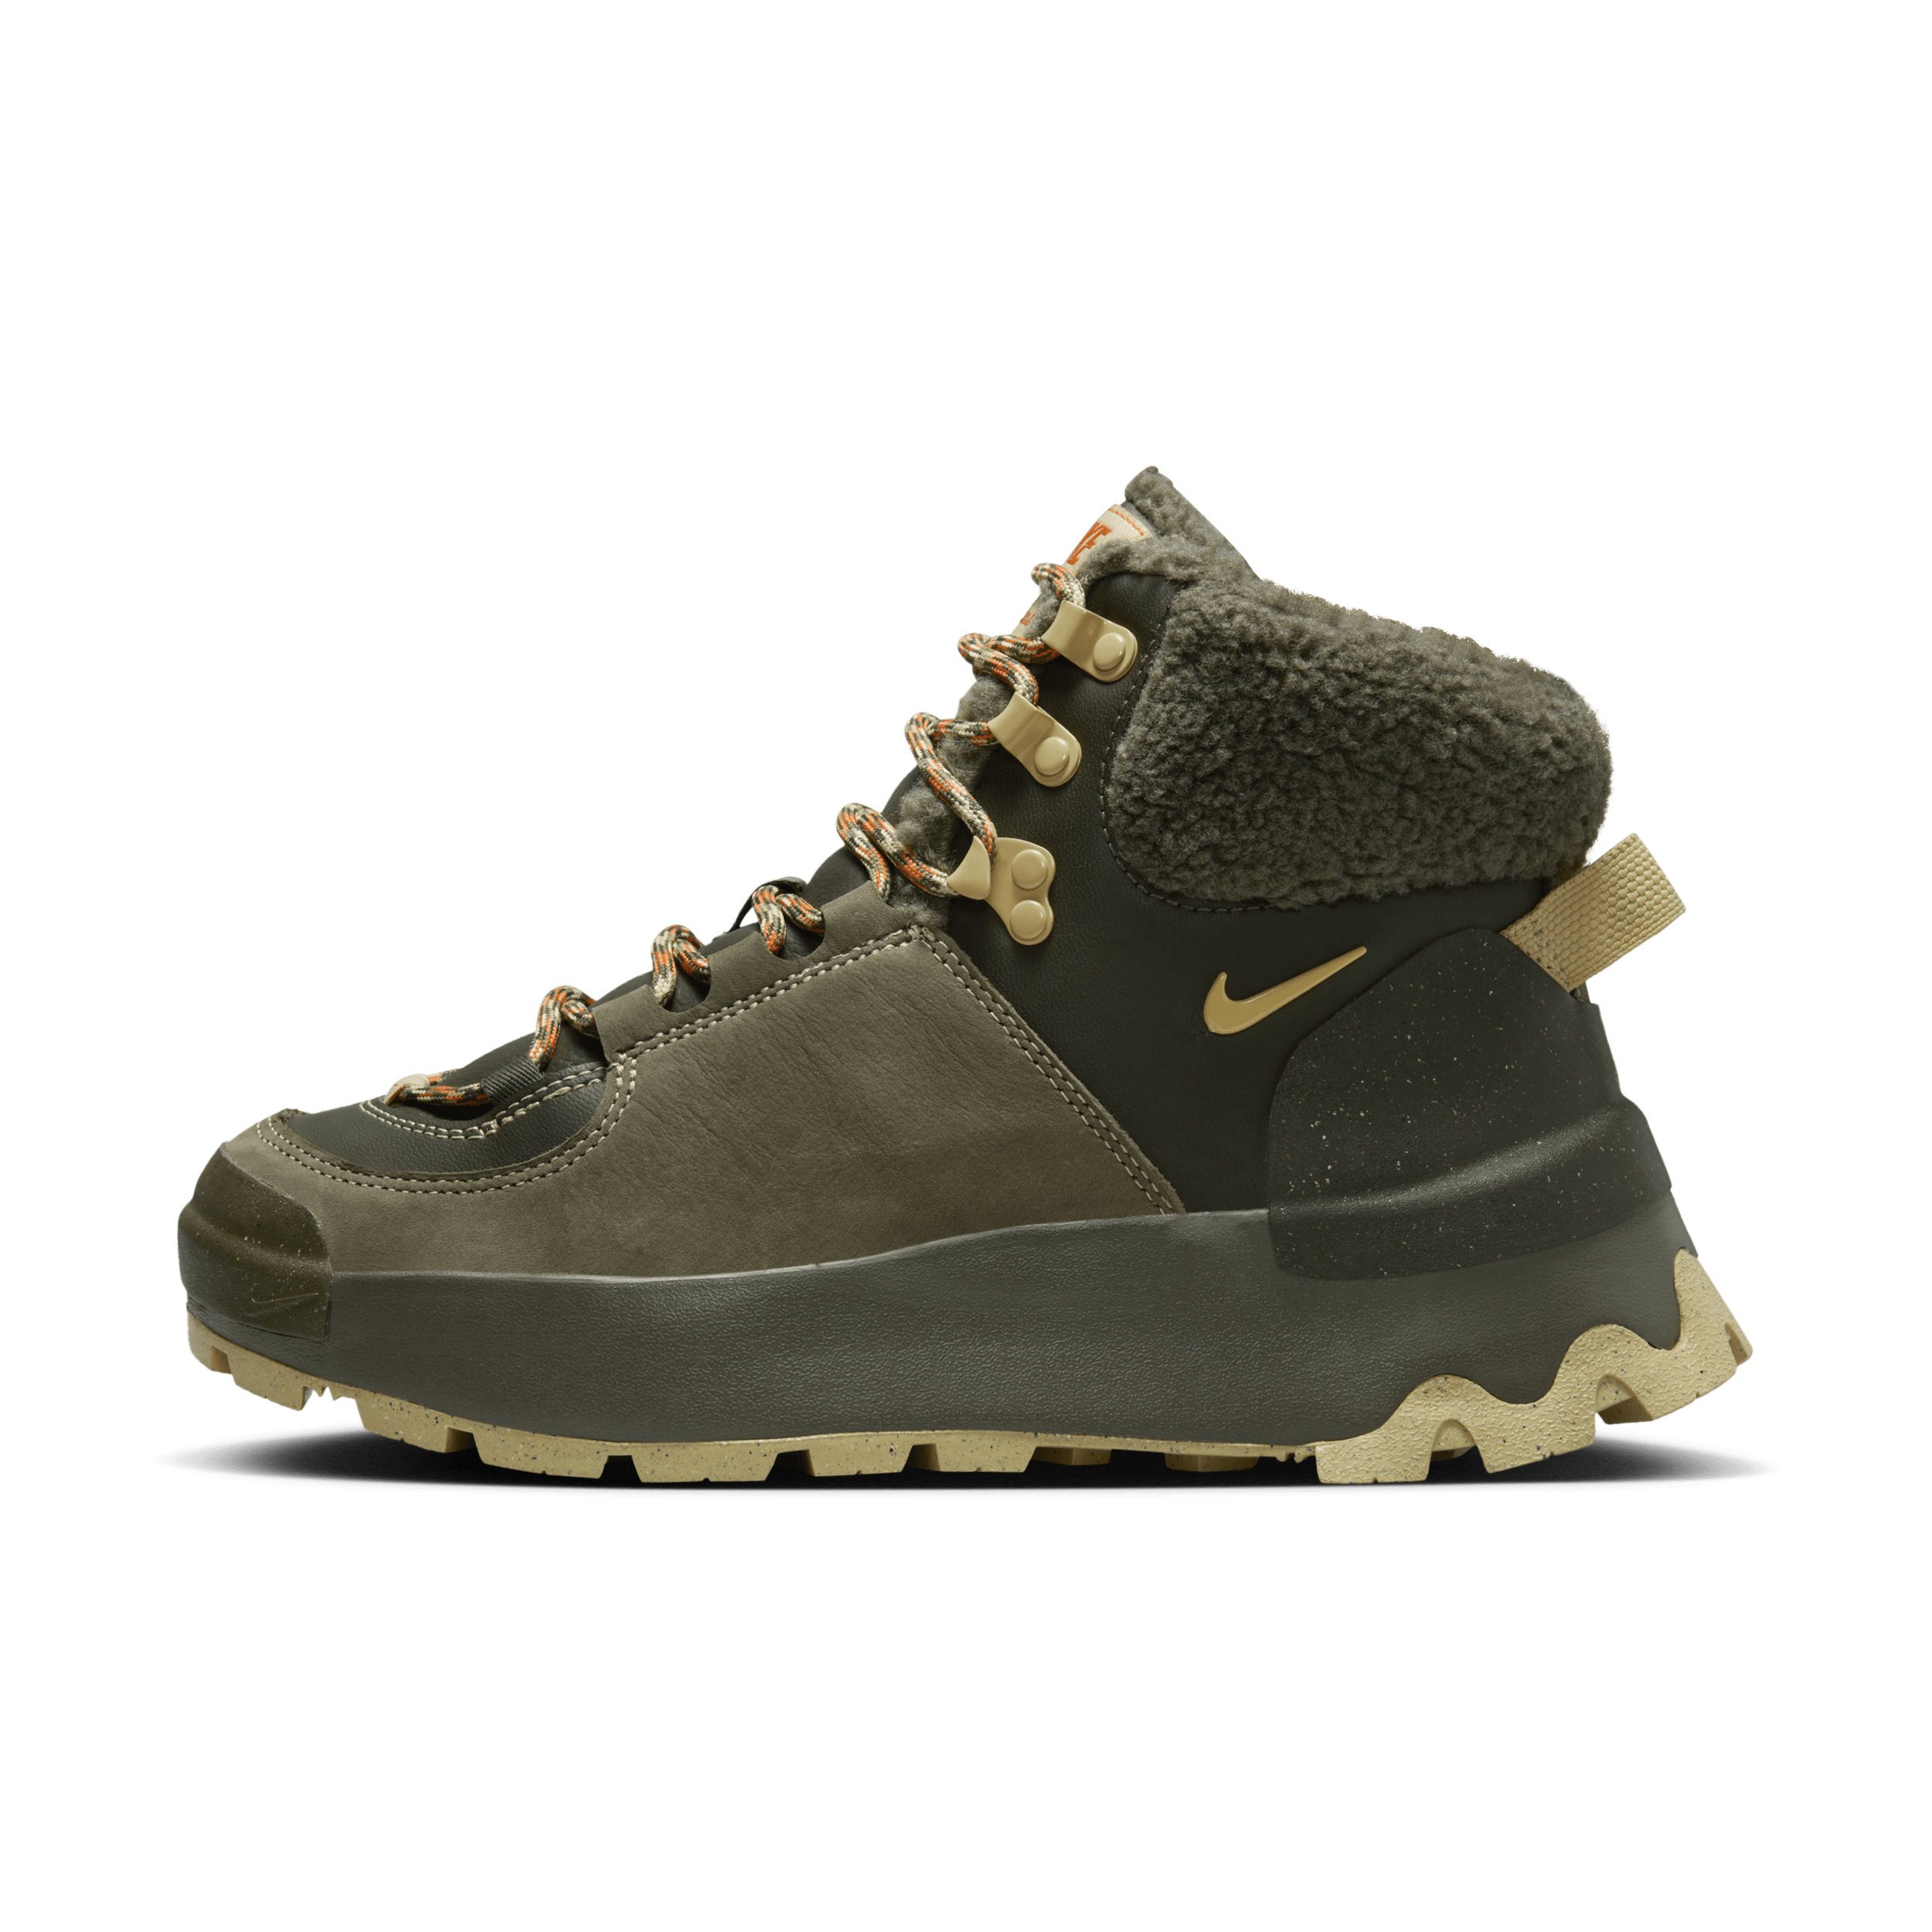 HIKING SHOES & BOOTS